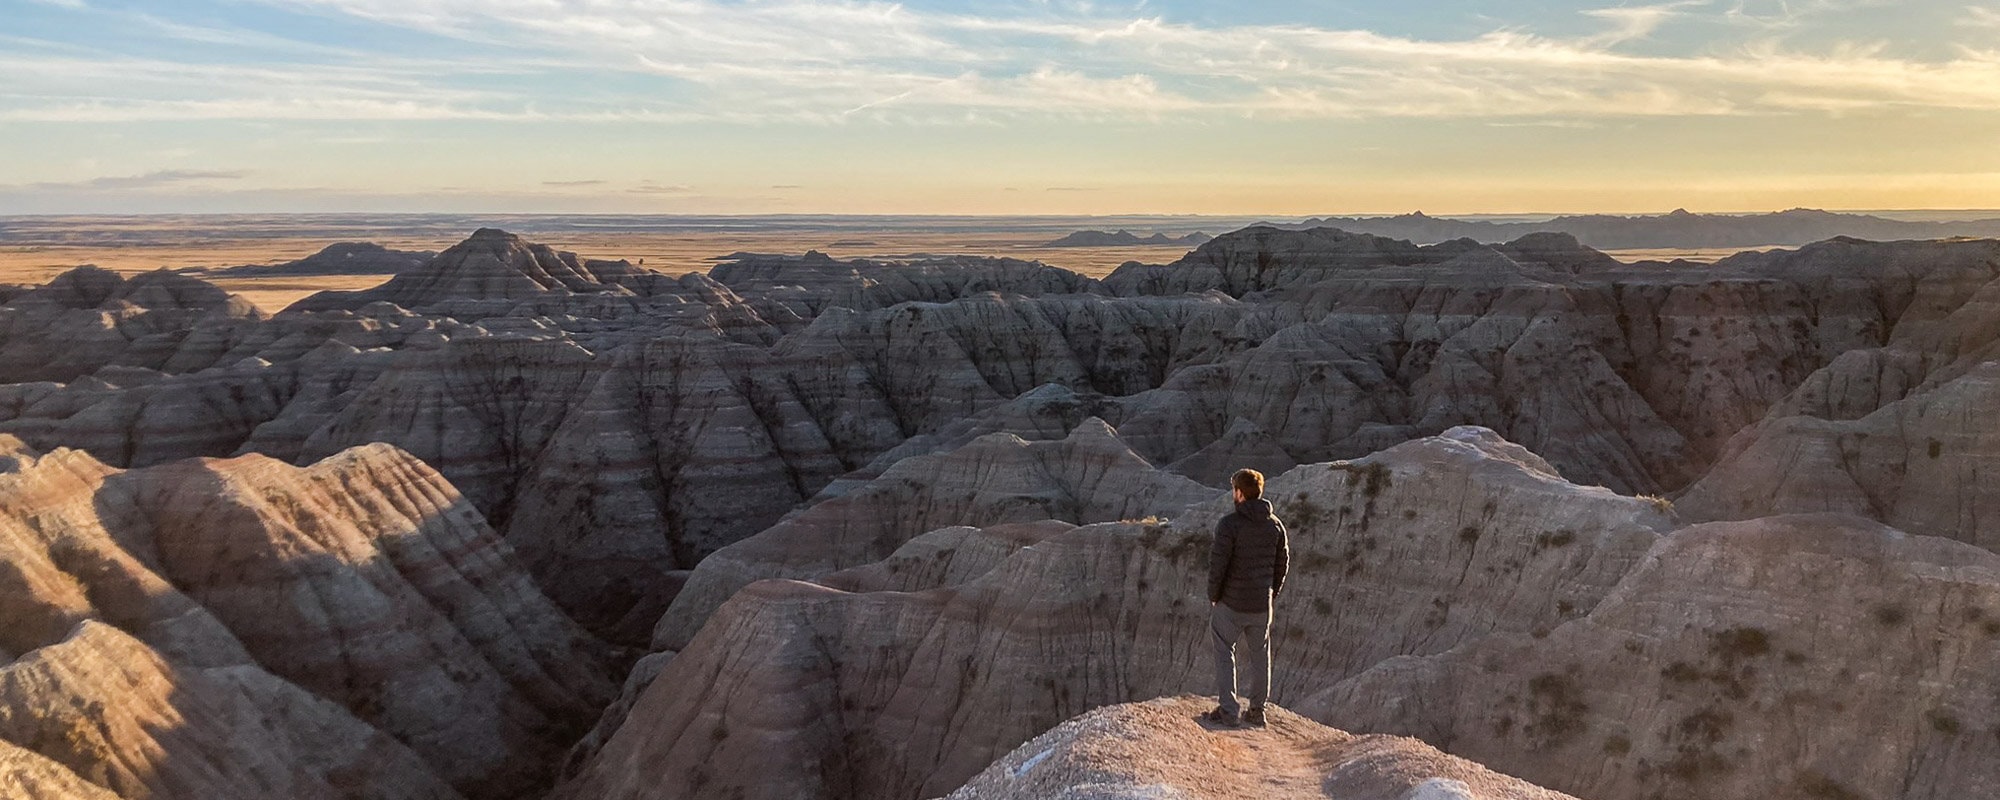 White River Valley Overlook at sunset with visitor, Badlands National Park in South Dakota